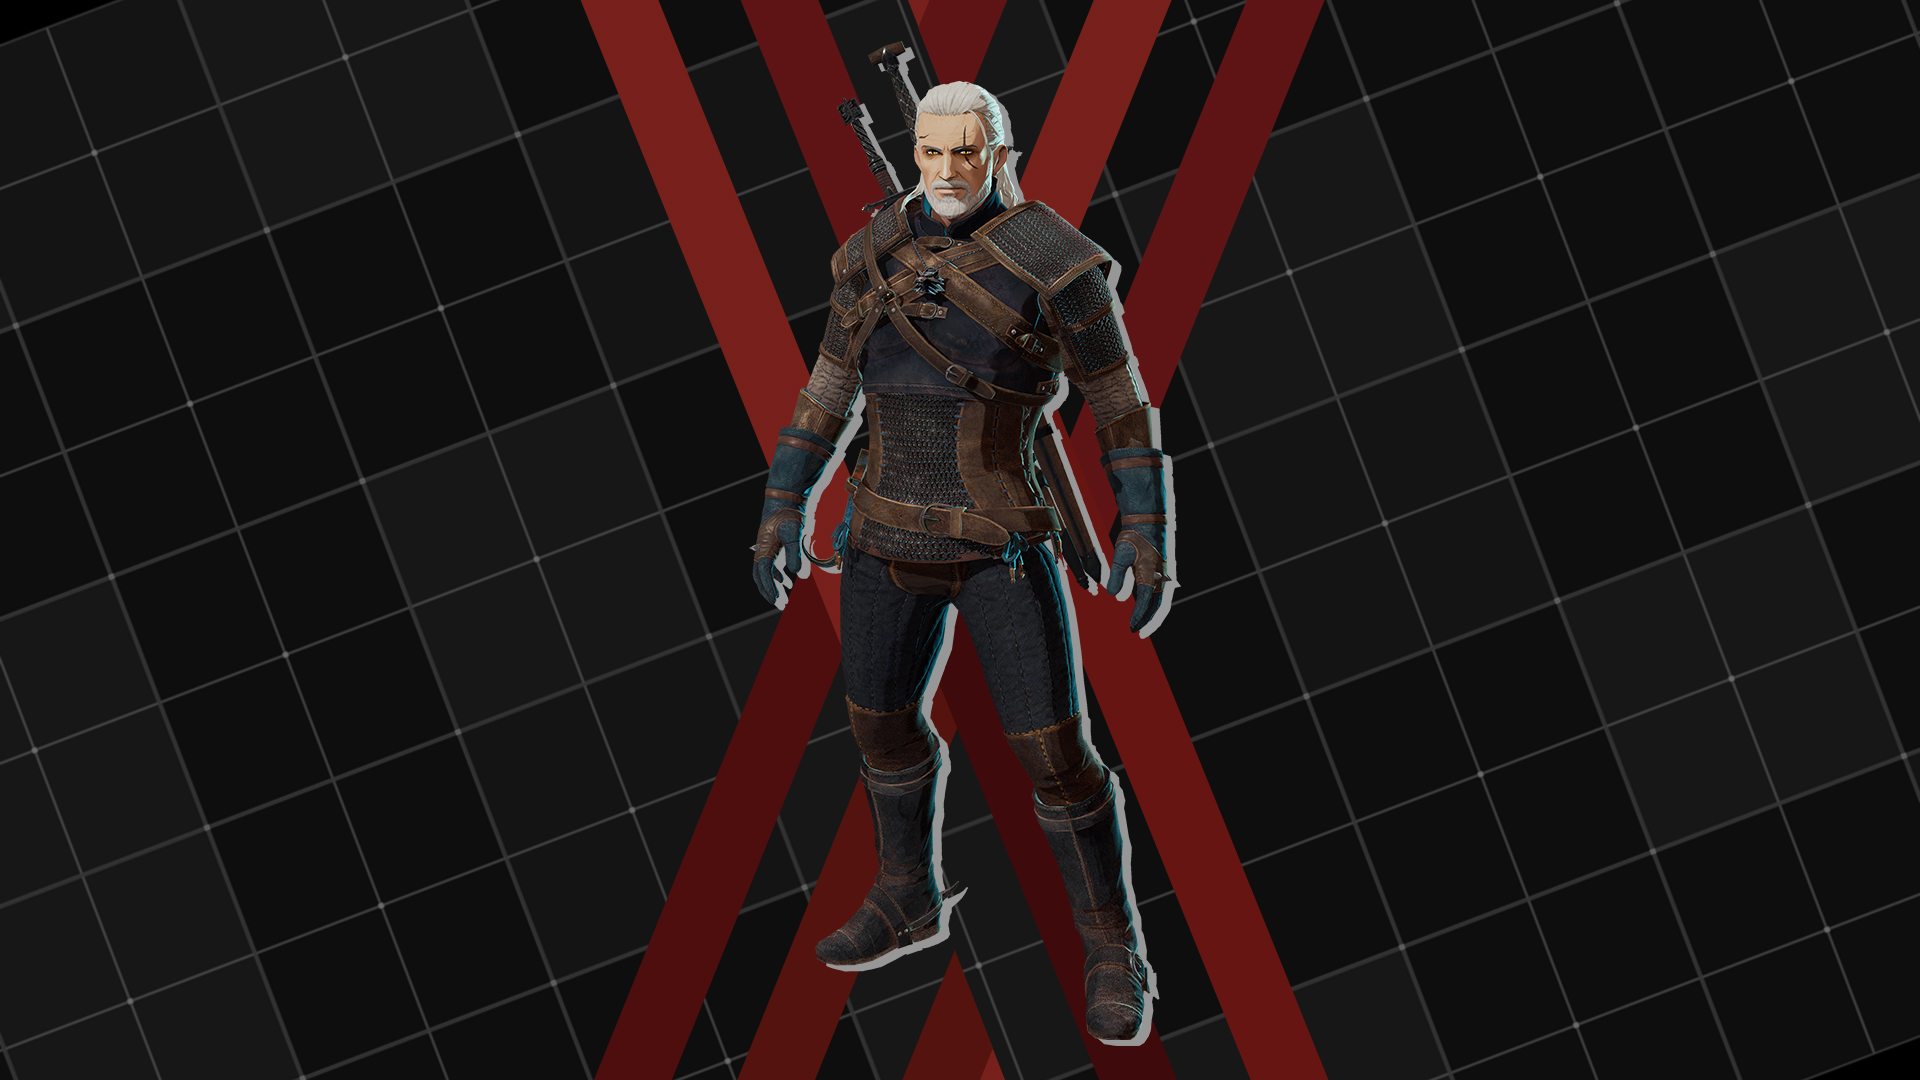 Outer Suit "Geralt's Outfit"